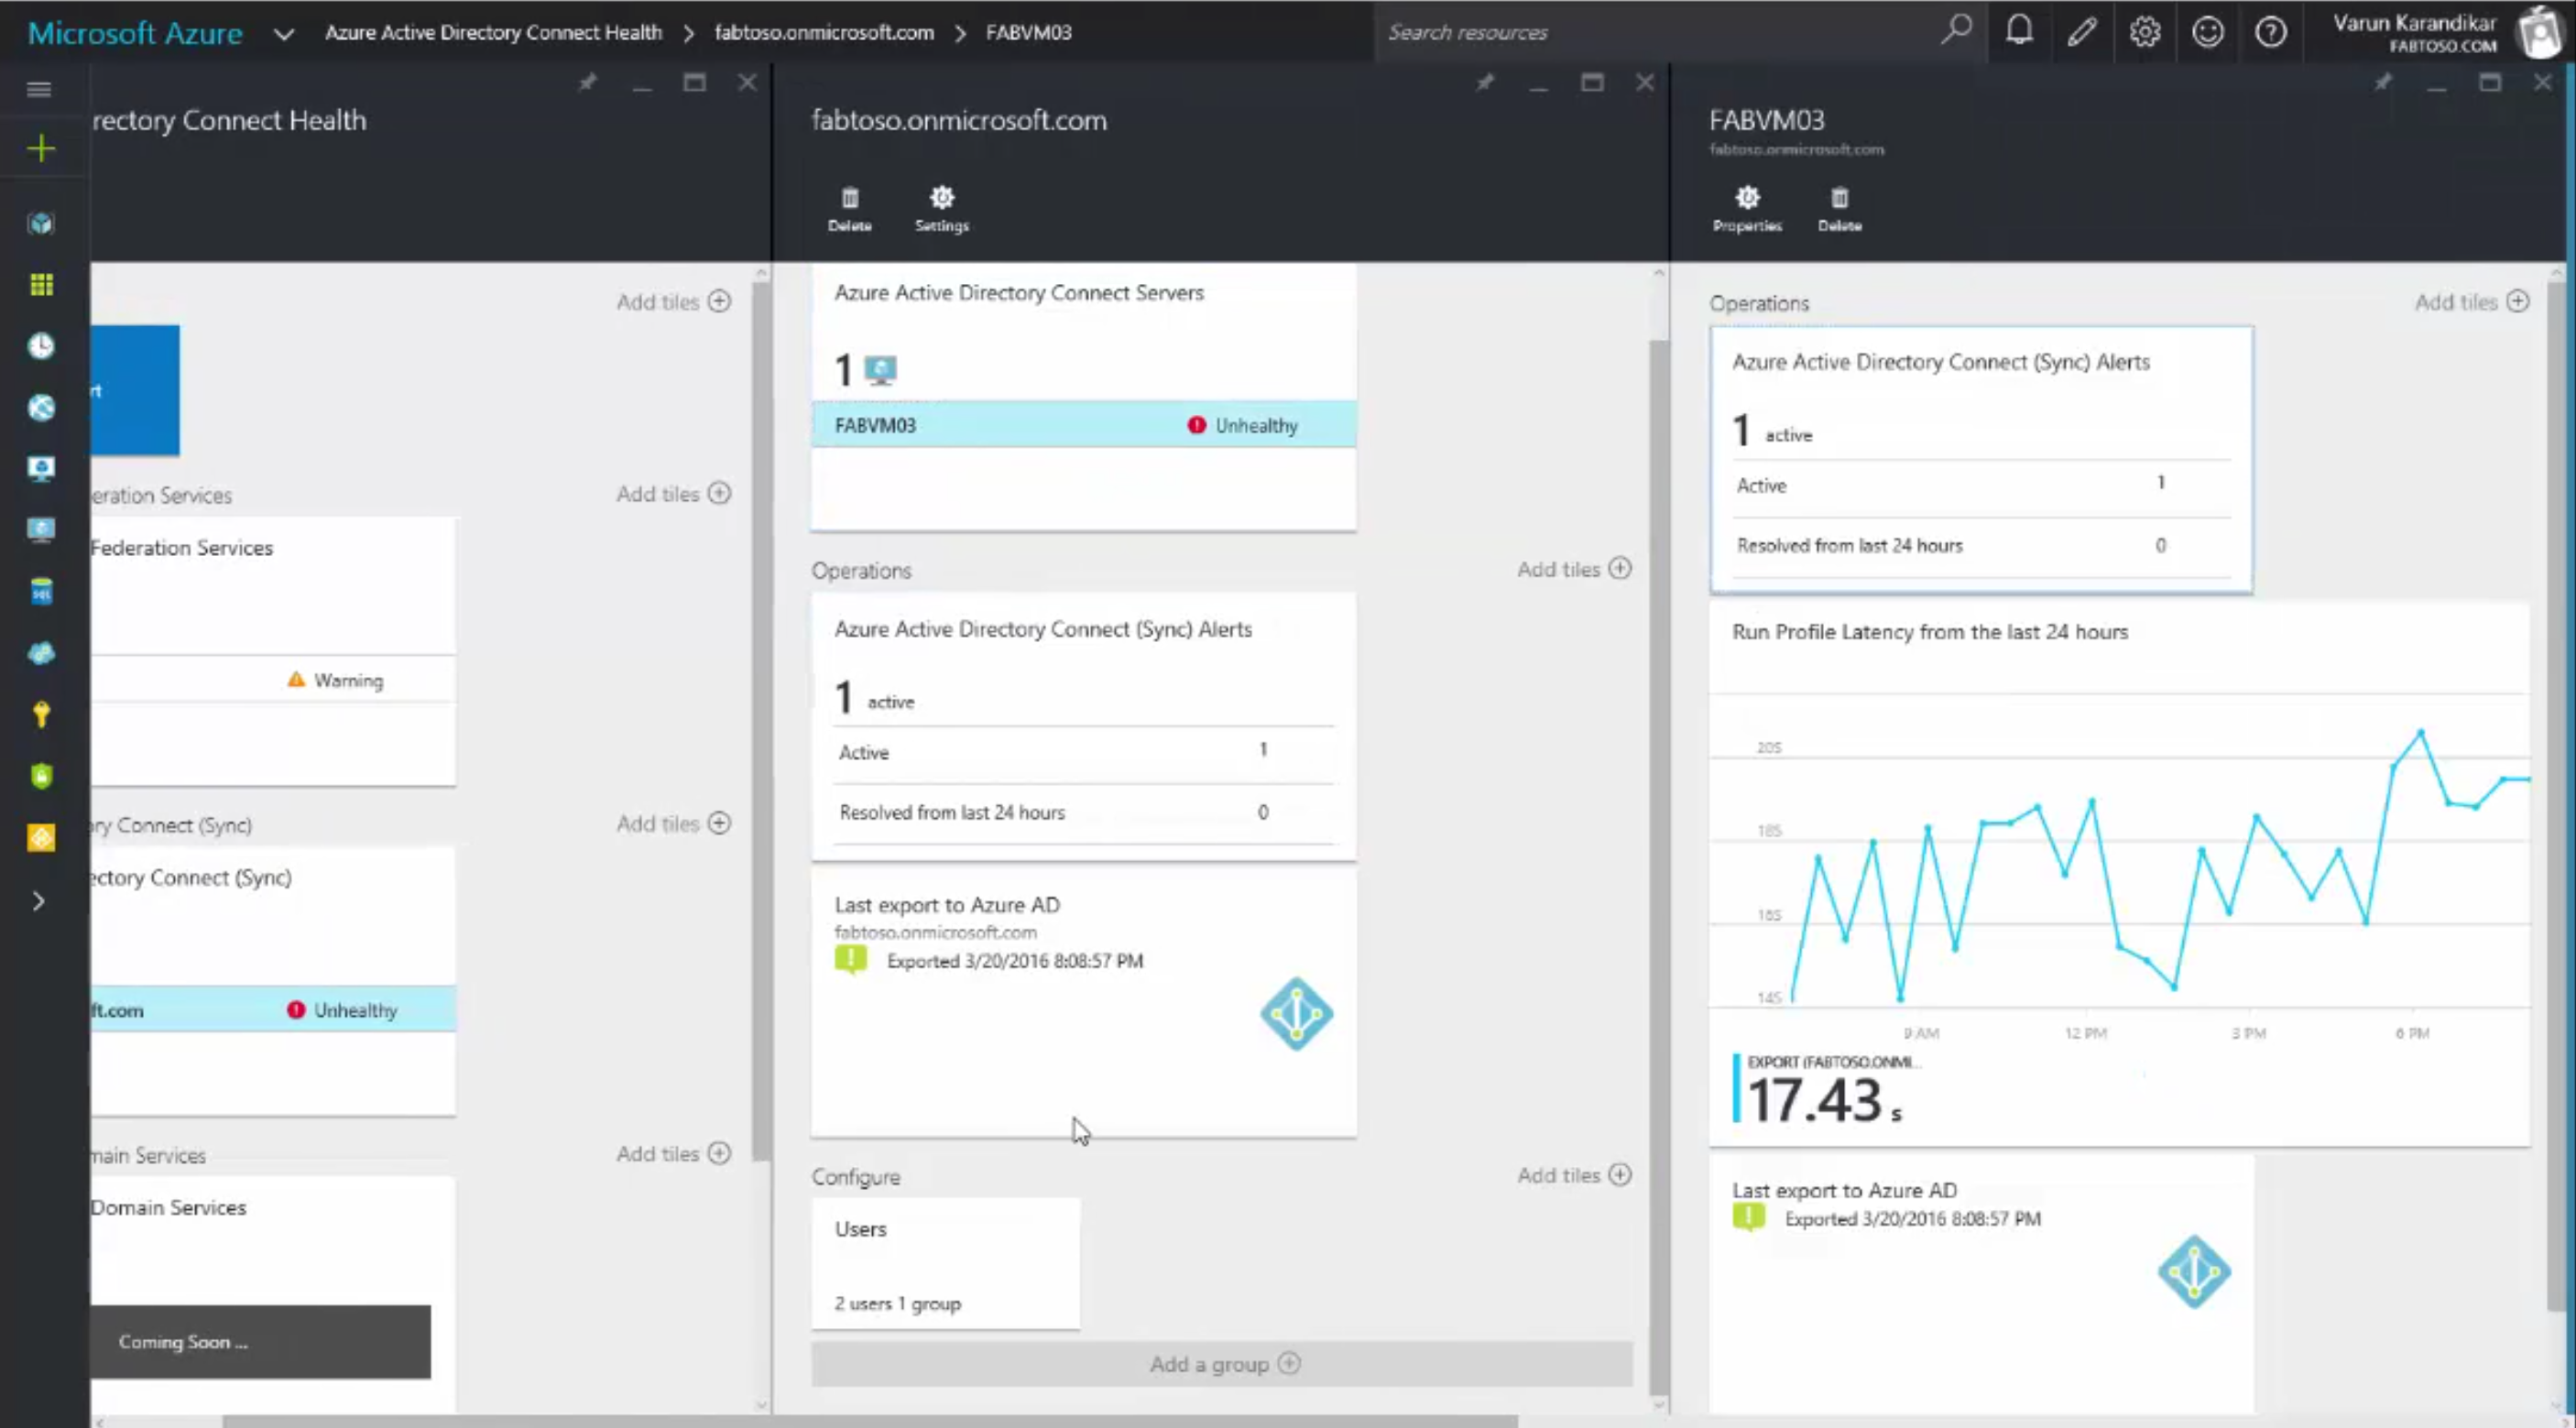 Azure AD Connect Health for sync [Image Credit: Microsoft]